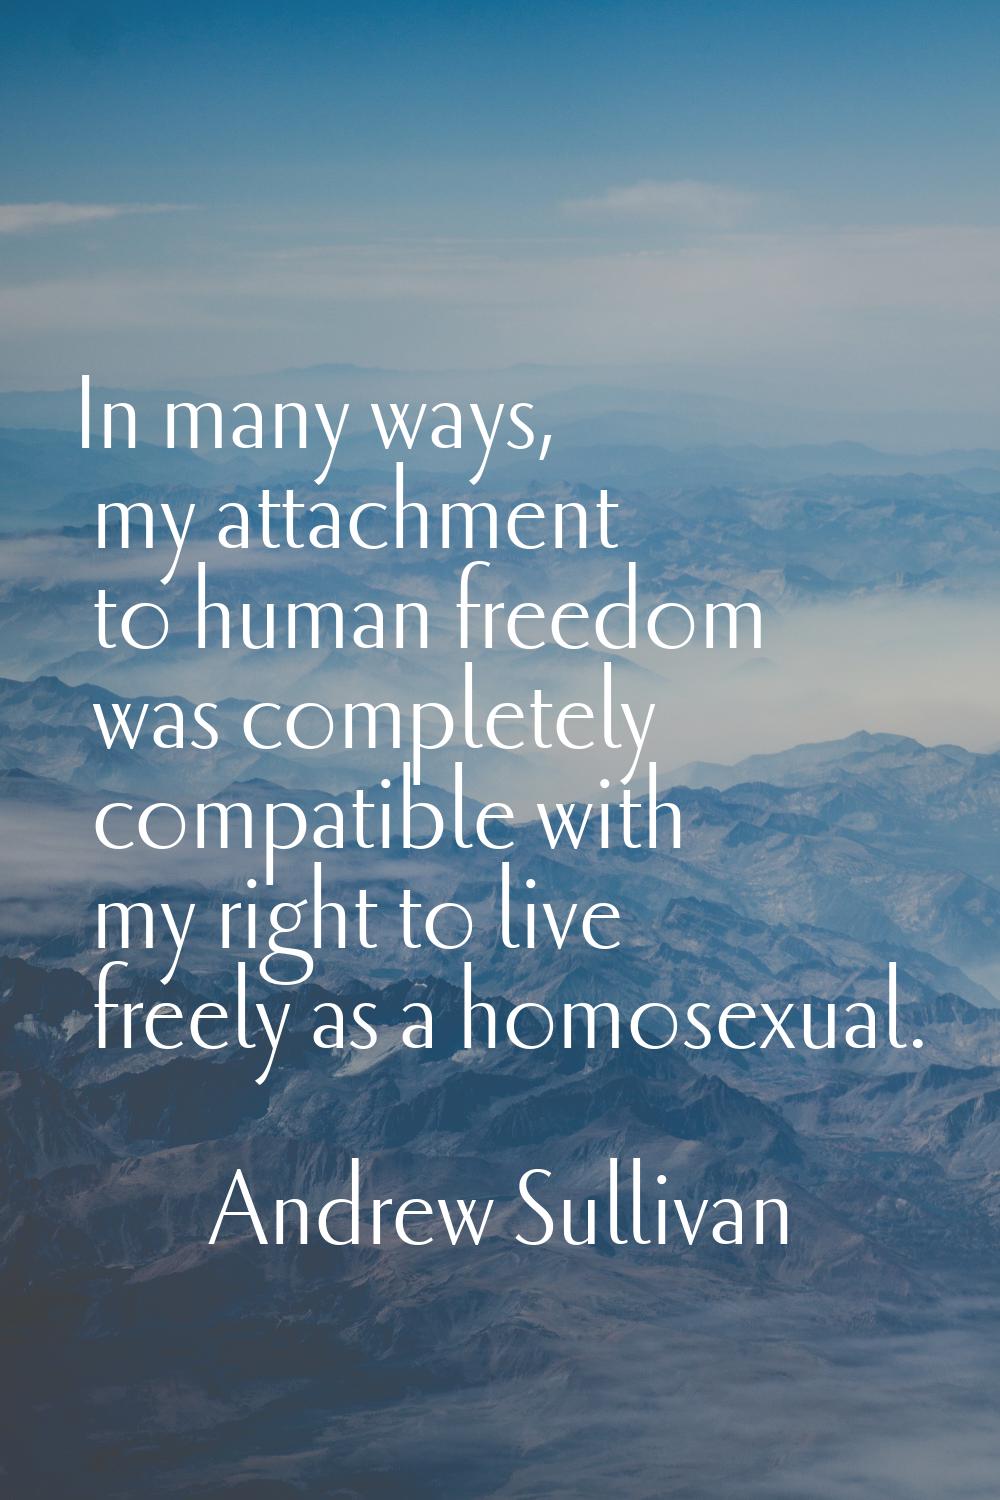 In many ways, my attachment to human freedom was completely compatible with my right to live freely